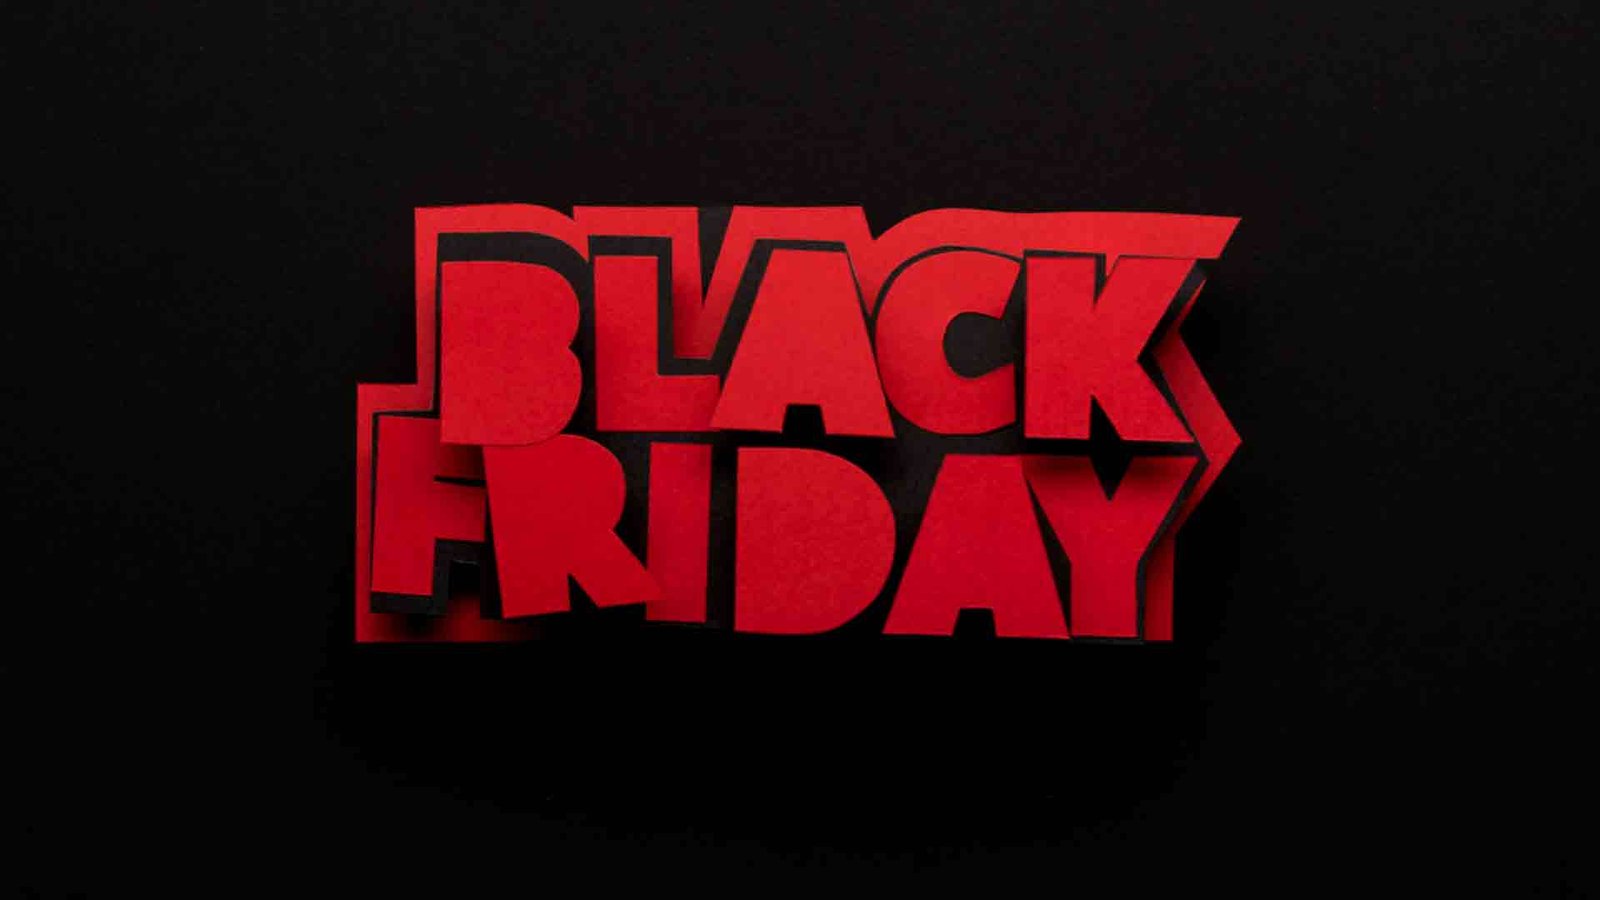 minimalist-black-friday-written-red-color